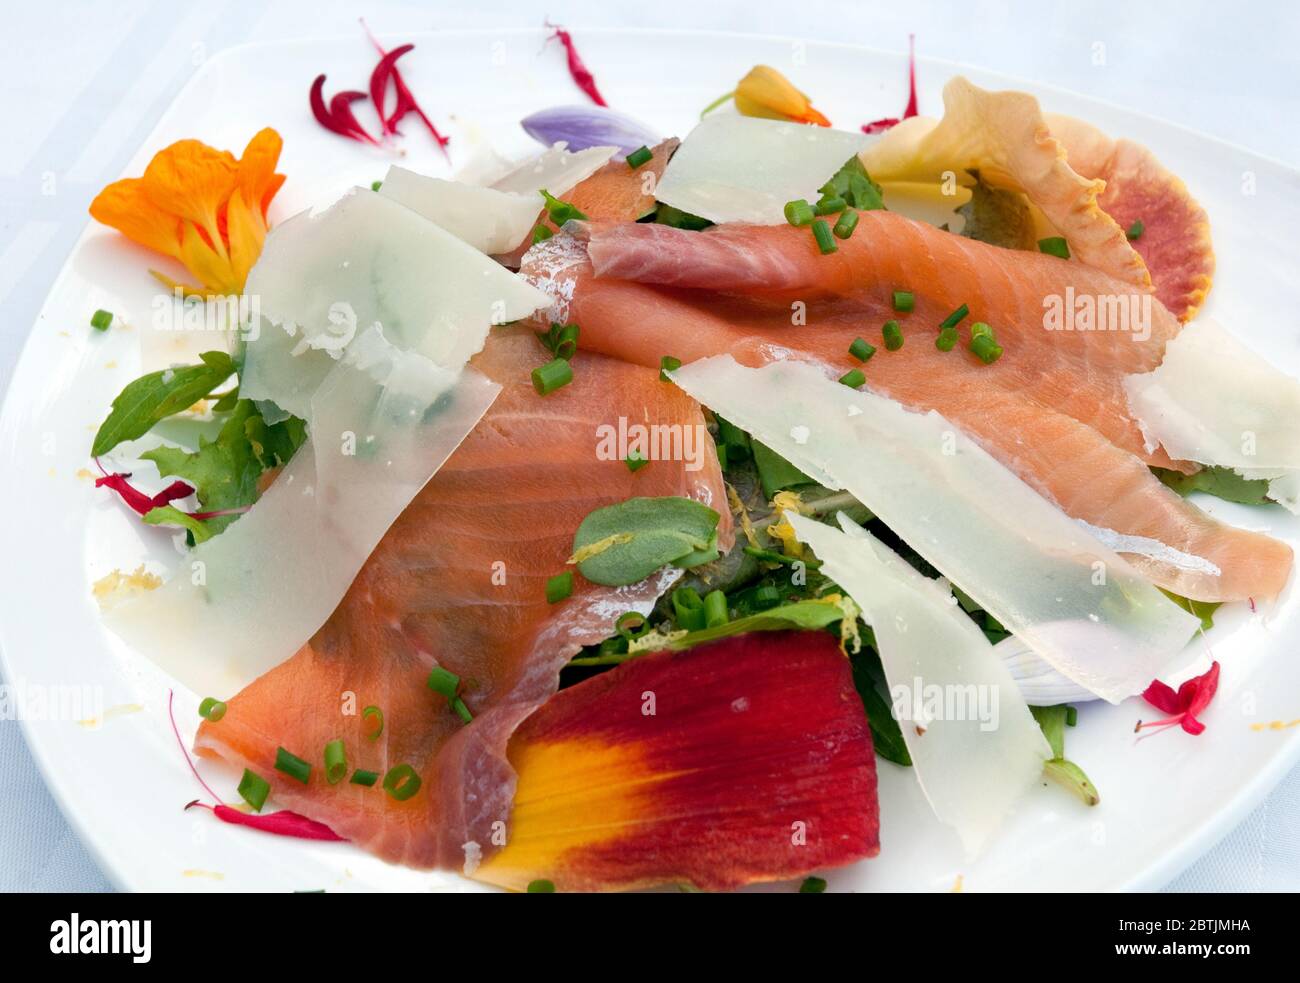 A salad plate with smoked salmon, mixed greens, edible flower petals, parmesan shavings and chives at a B&B in the eastern townships of Quebec, Canada. Stock Photo